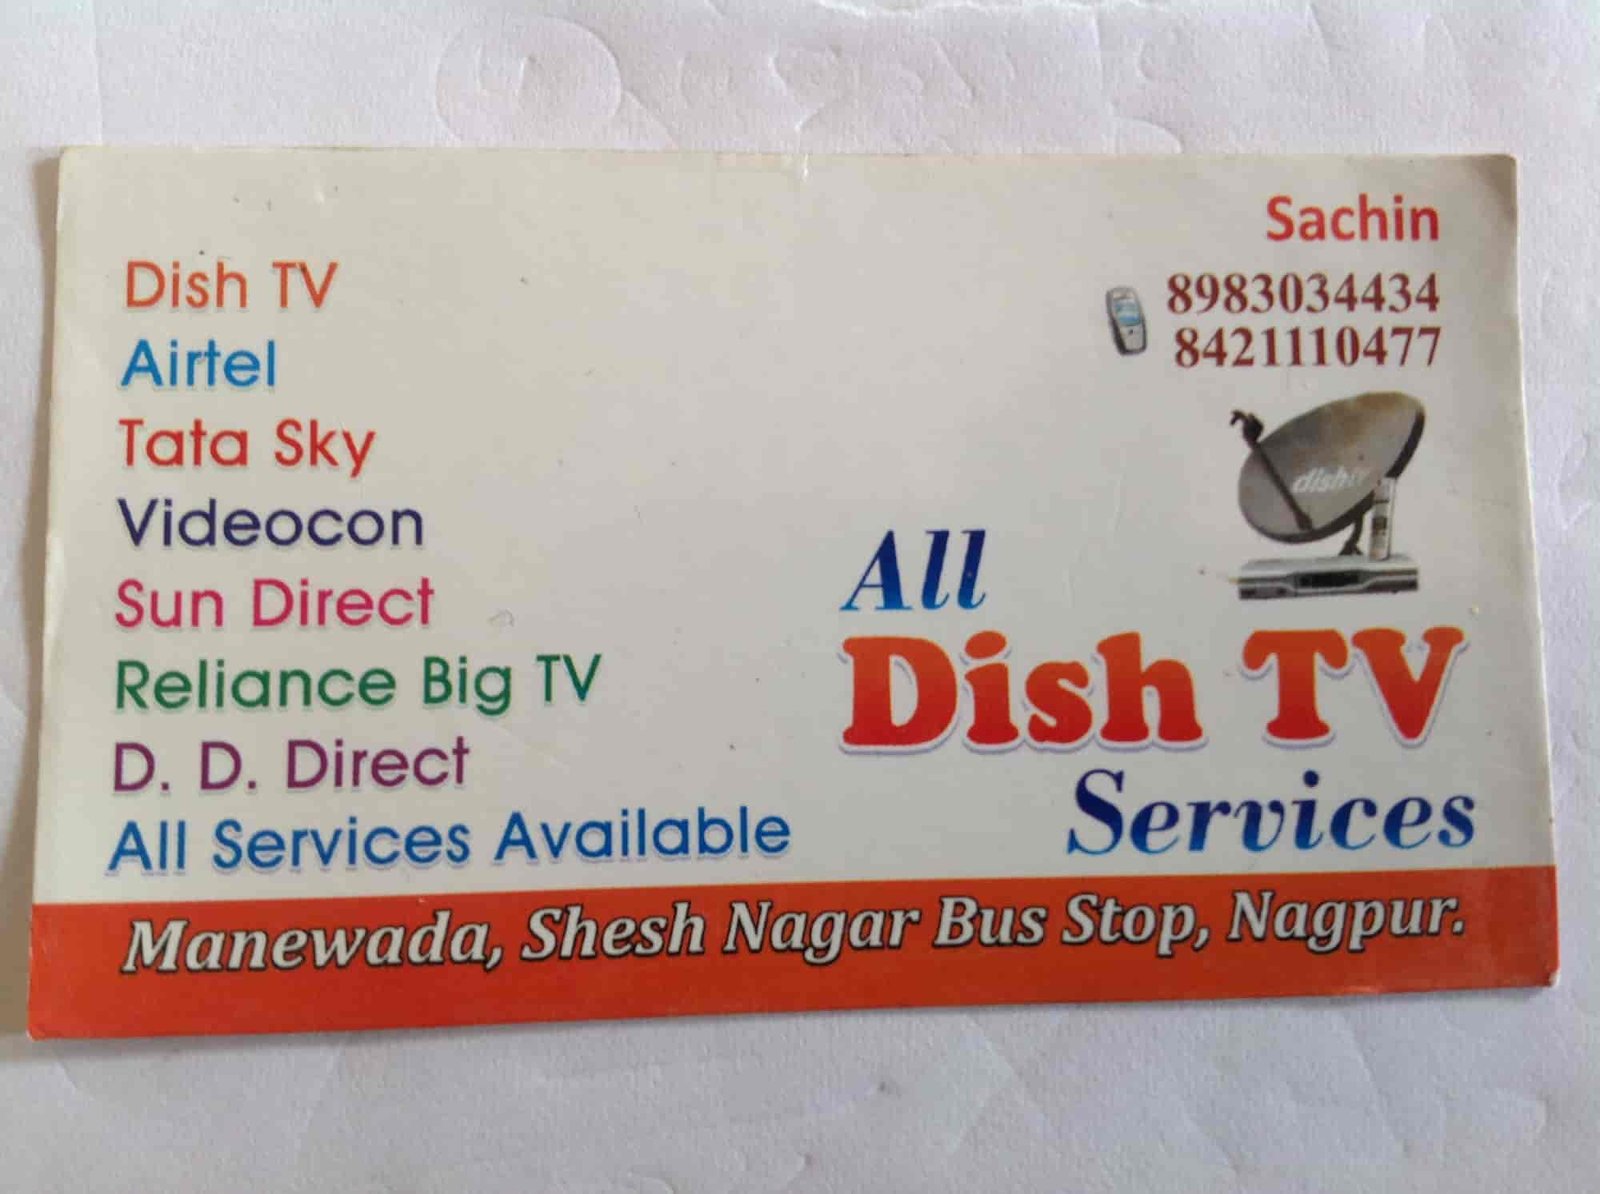 All Dish TV Services